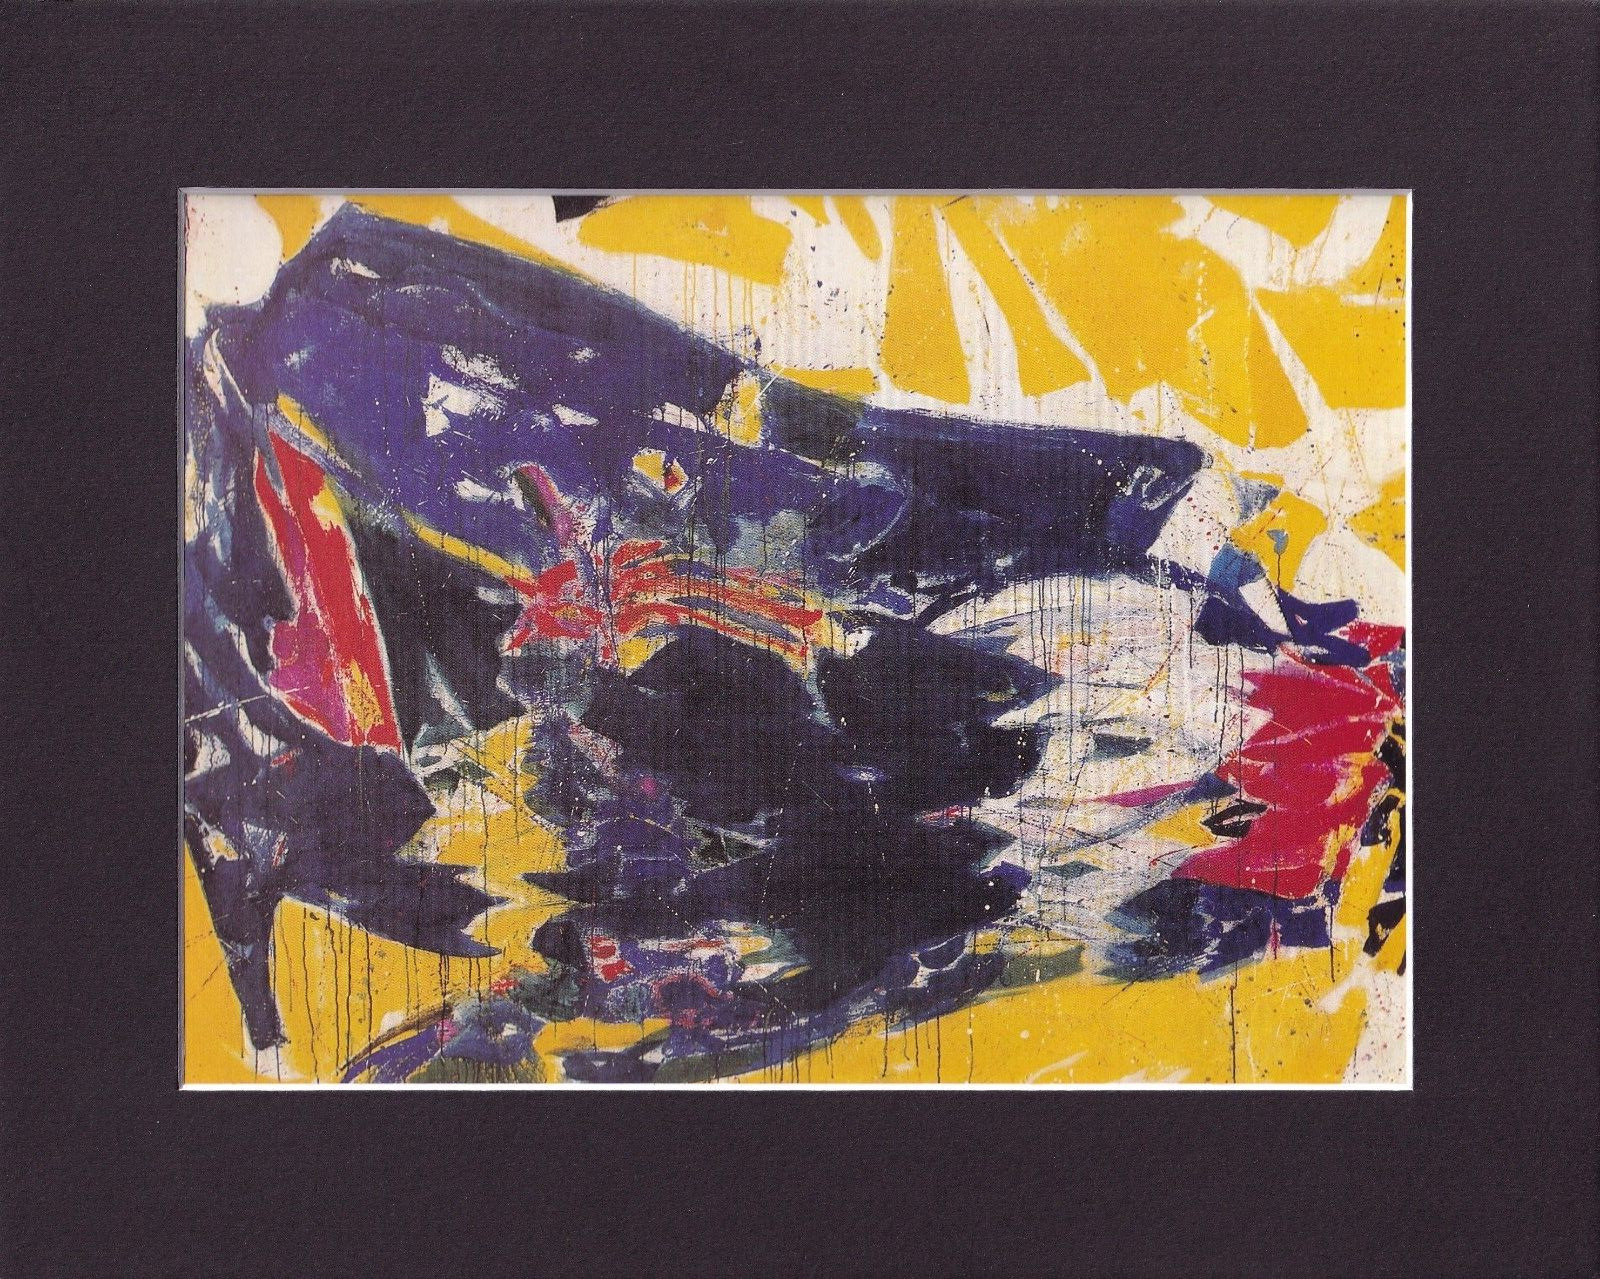 8X10 Matted Print Art Classic Picture: Sam Francis, 1959 Untitled